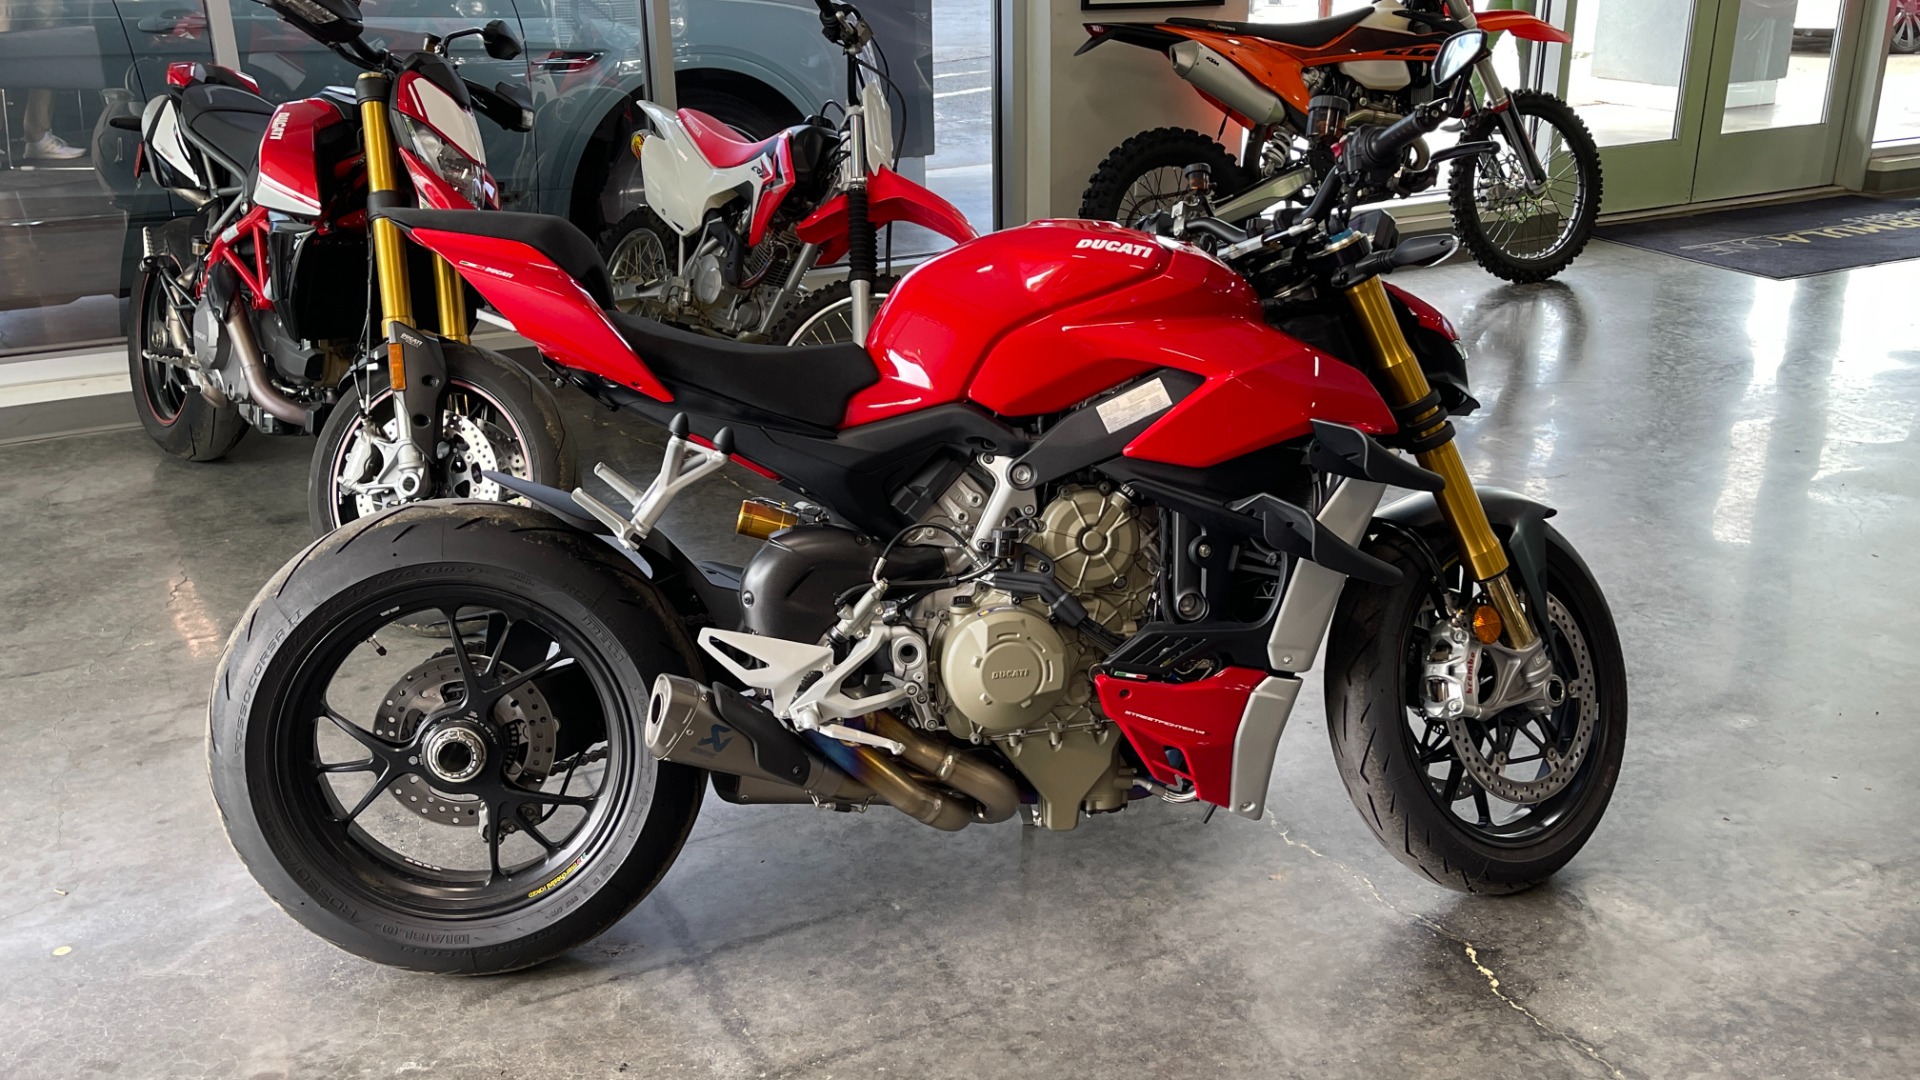 Used 2020 Ducati STREETFIGHTER V4S 1100CC MOTORCYCLE / 208HP (153 kW) / LIKE NEW for sale $24,599 at Formula Imports in Charlotte NC 28227 3